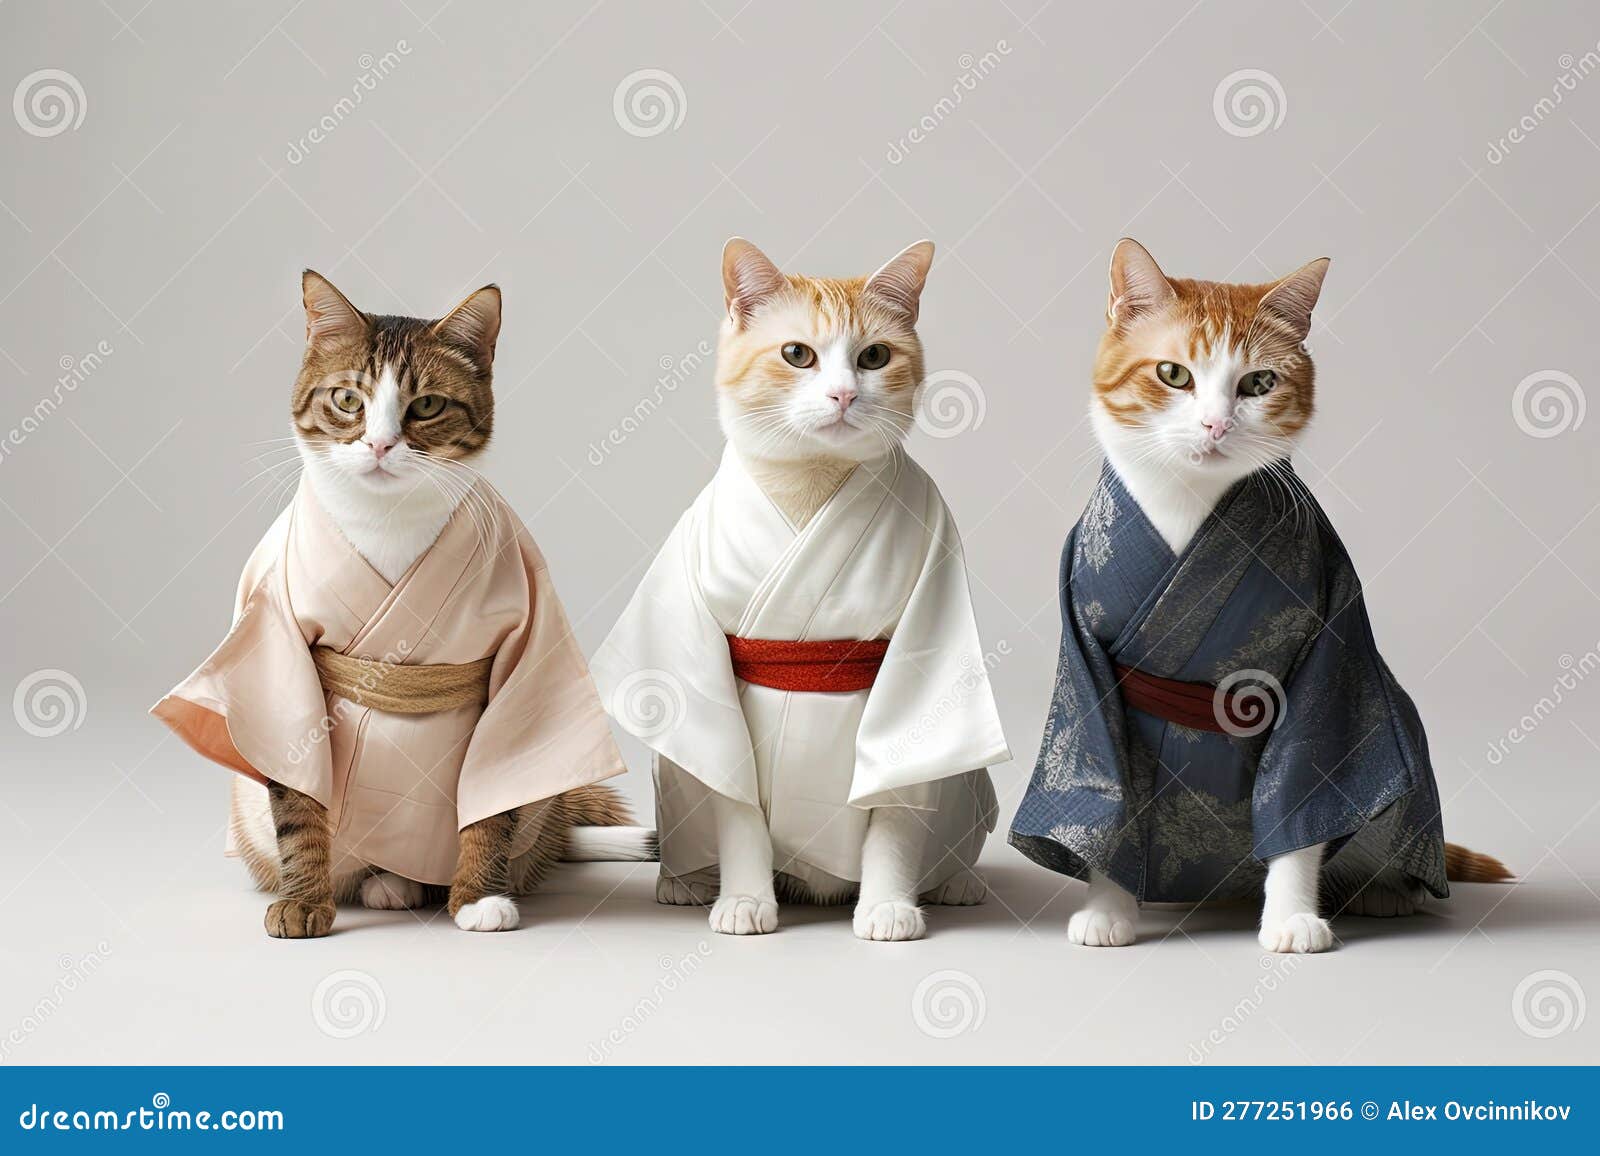 feline fashionistas: three cats in karate outfits strike a pose on white background.